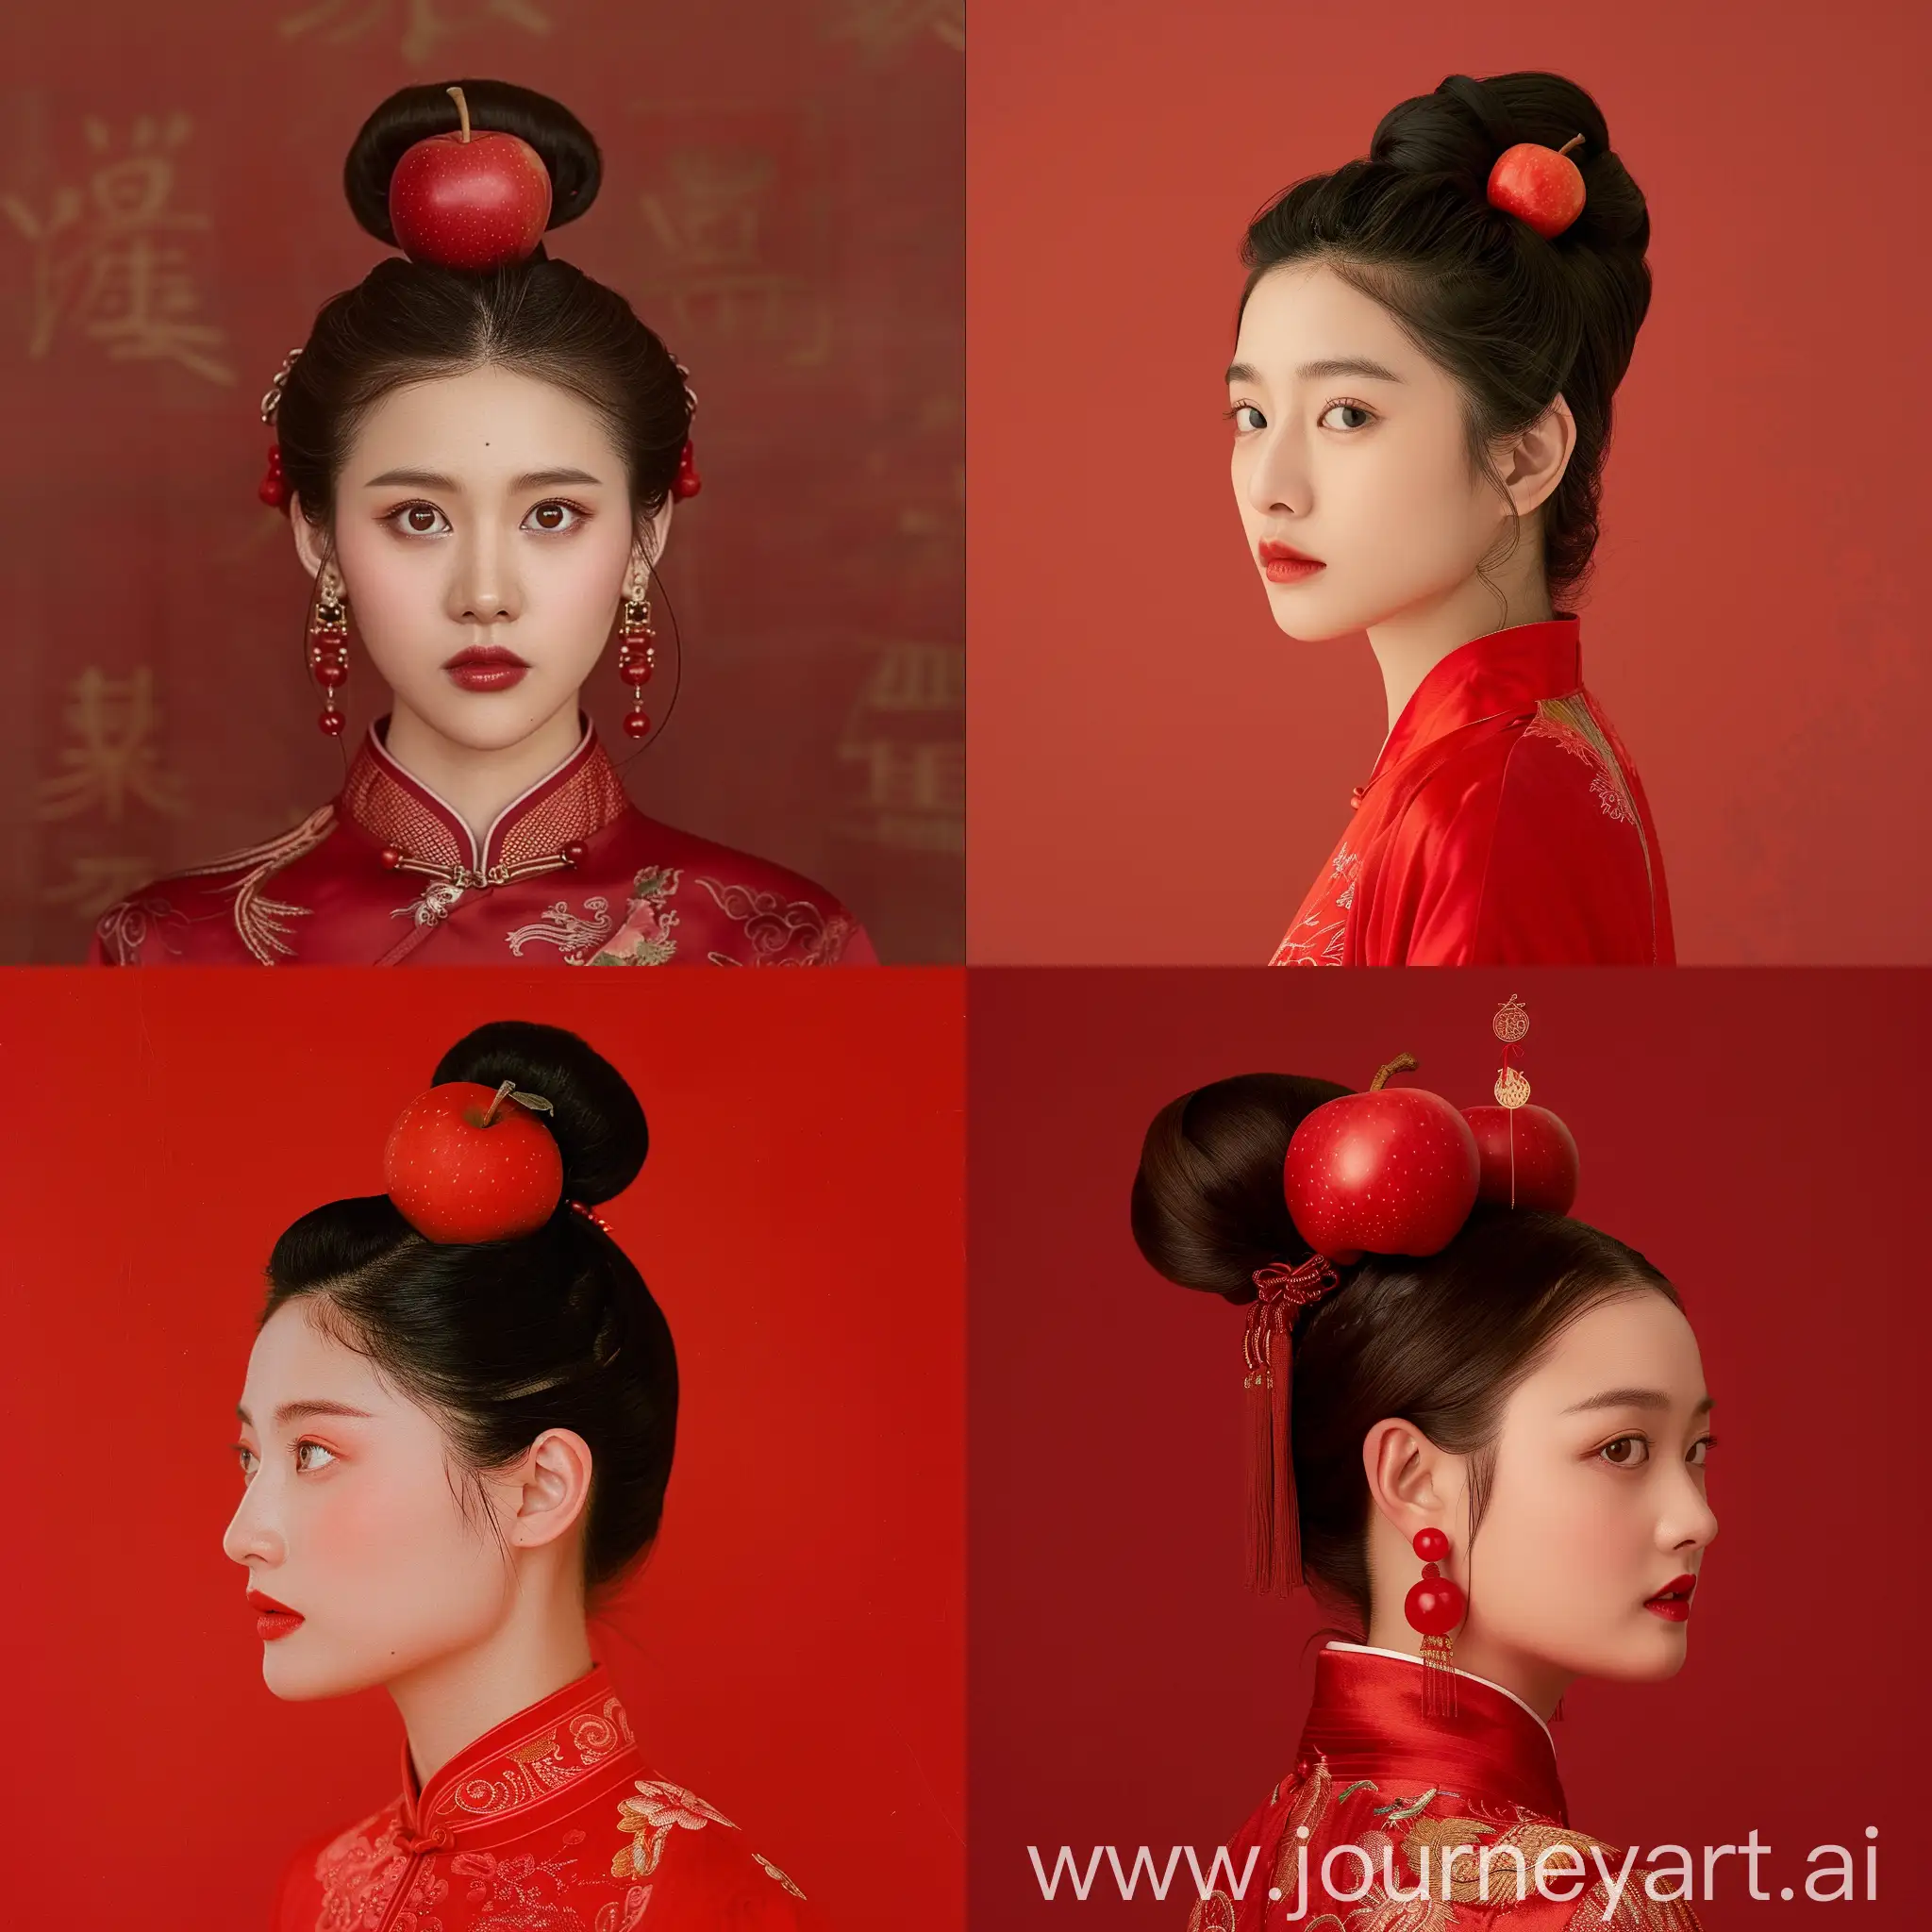 Elegant-Ancient-Chinese-Scholar-with-Appleshaped-Bun